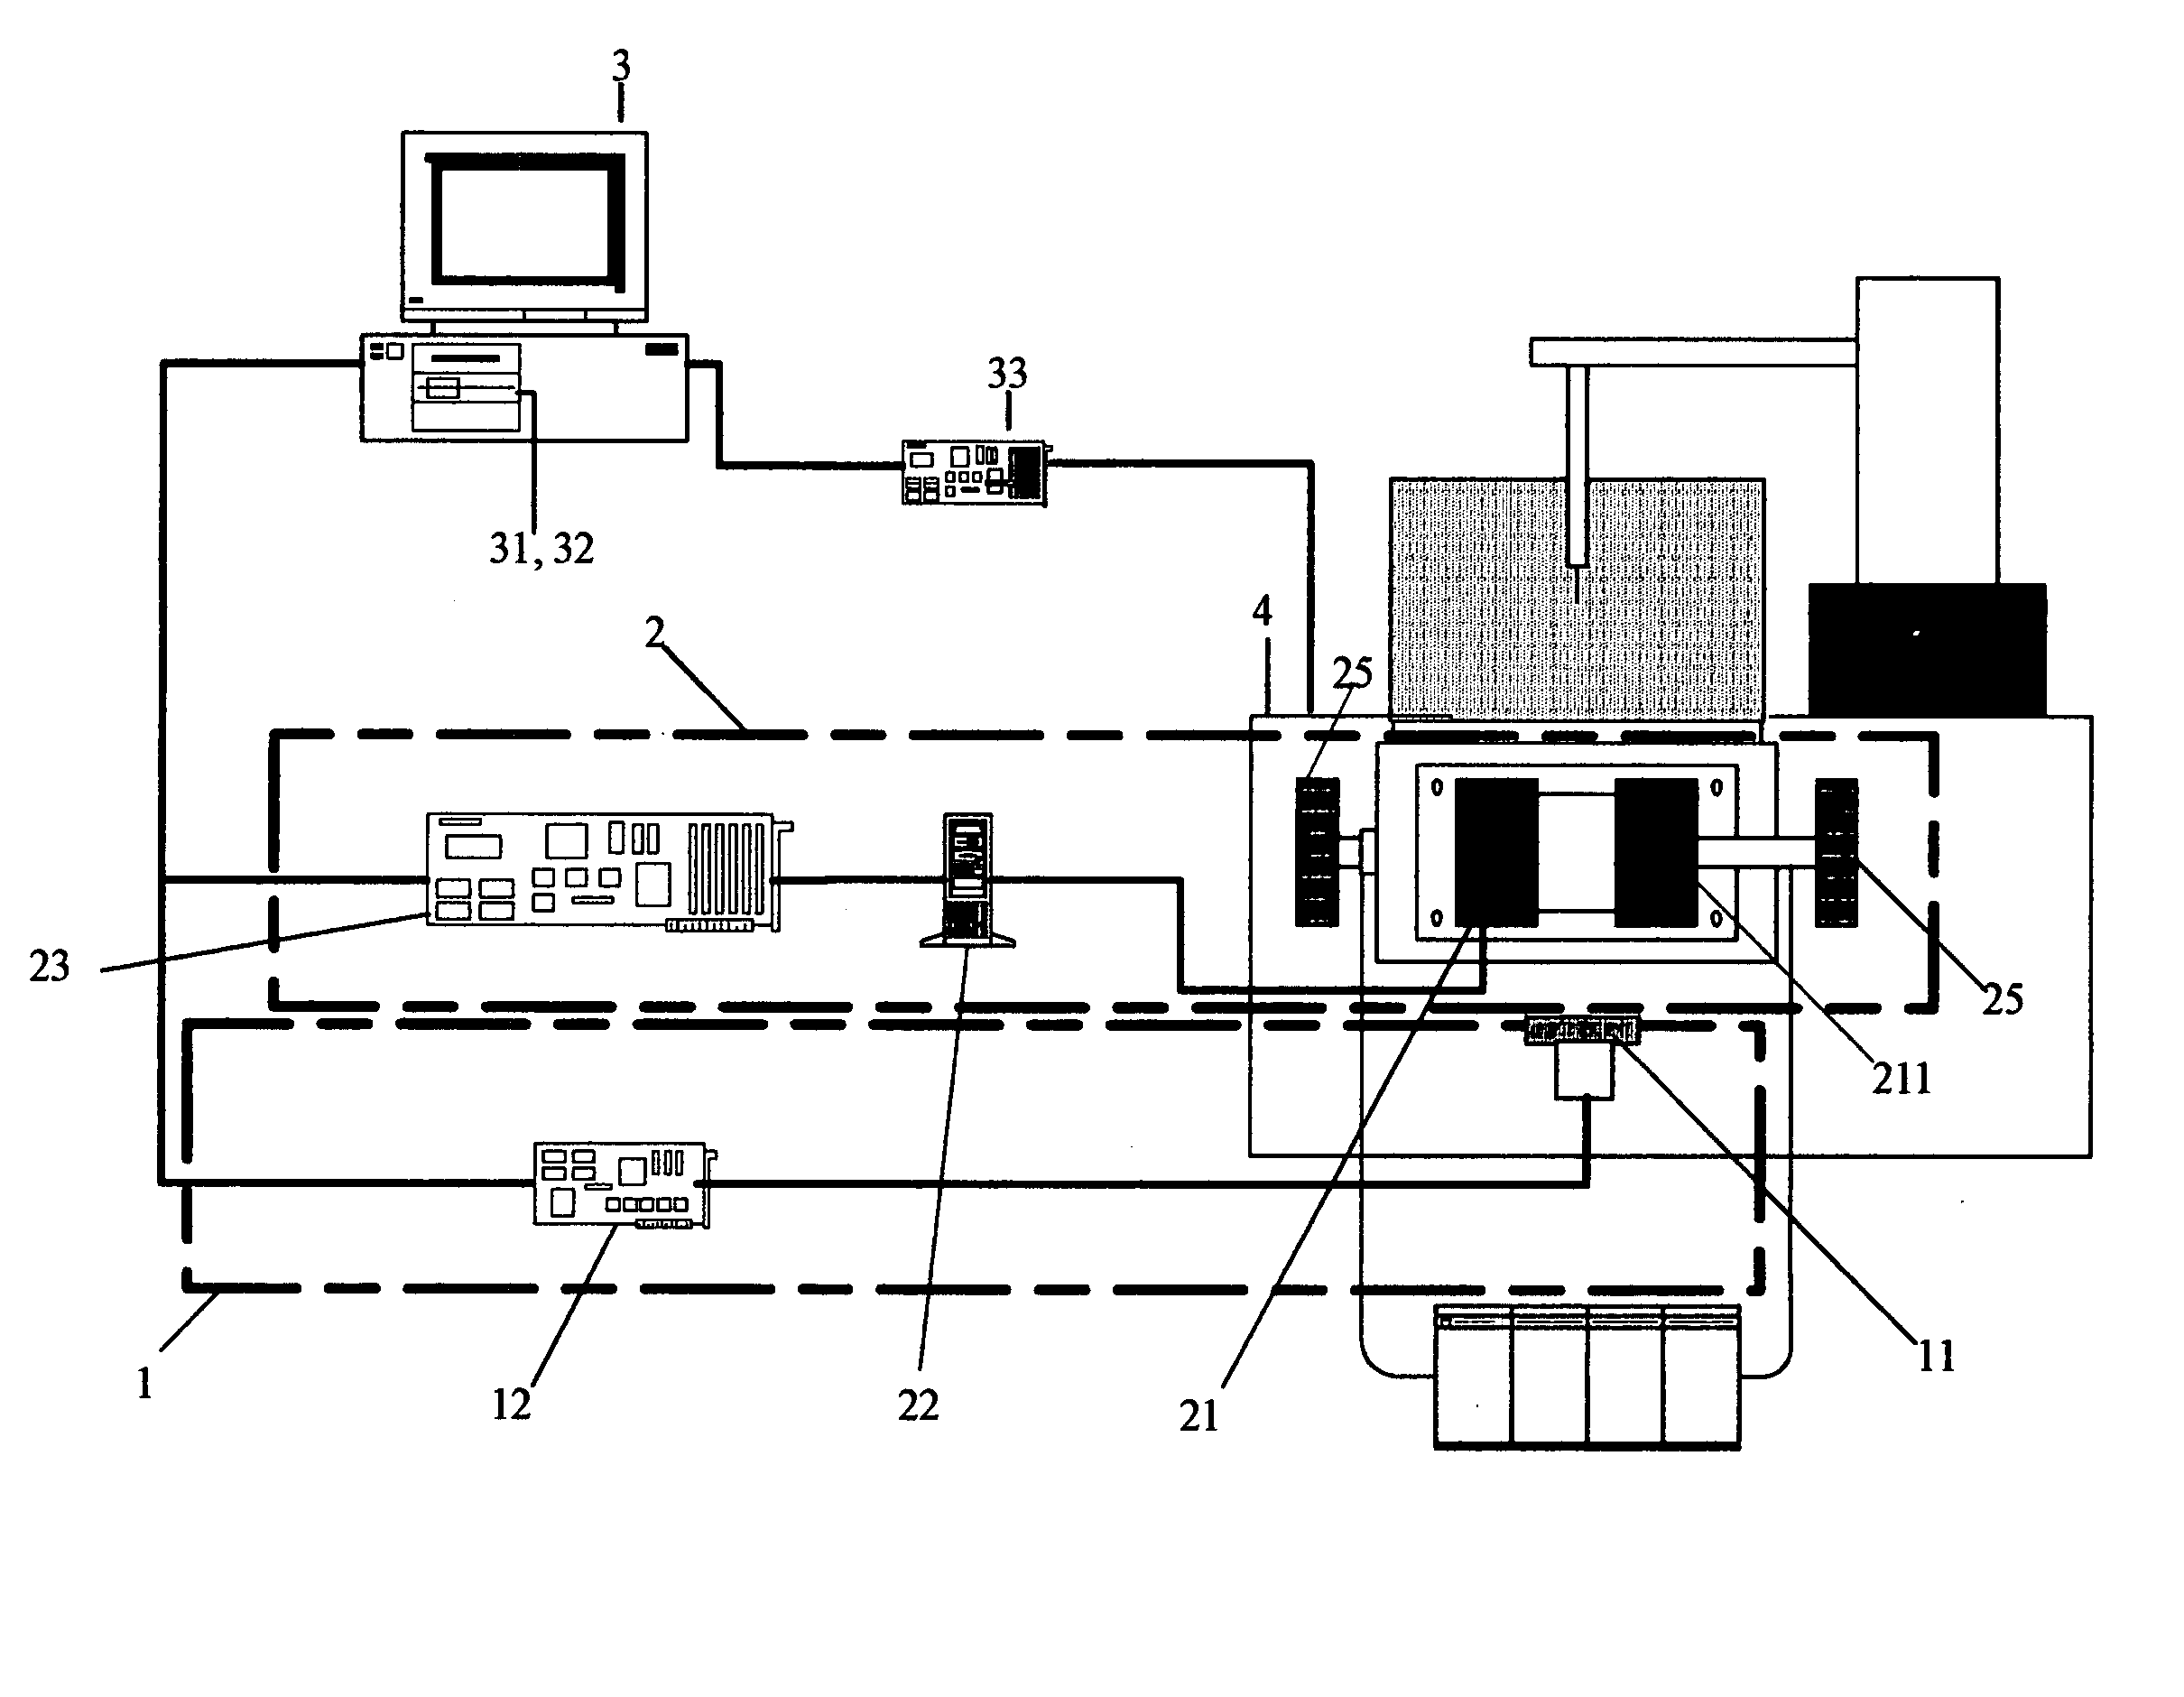 Electrohydraulic shock wave-generating system with automatic gap adjustment